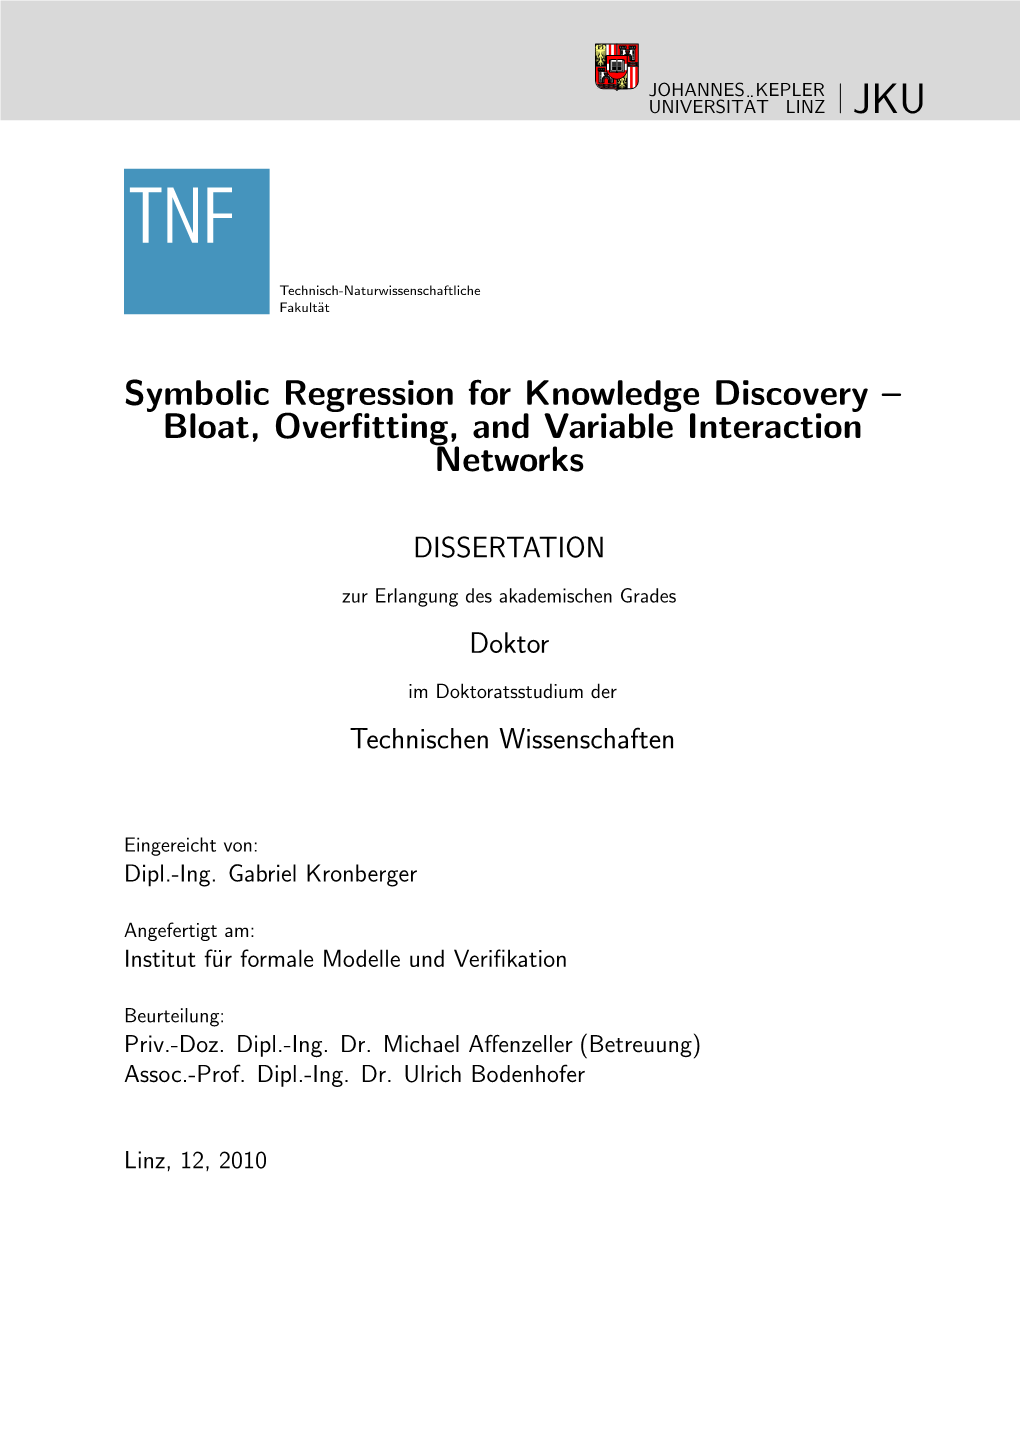 Symbolic Regression for Knowledge Discovery – Bloat, Overfitting, And